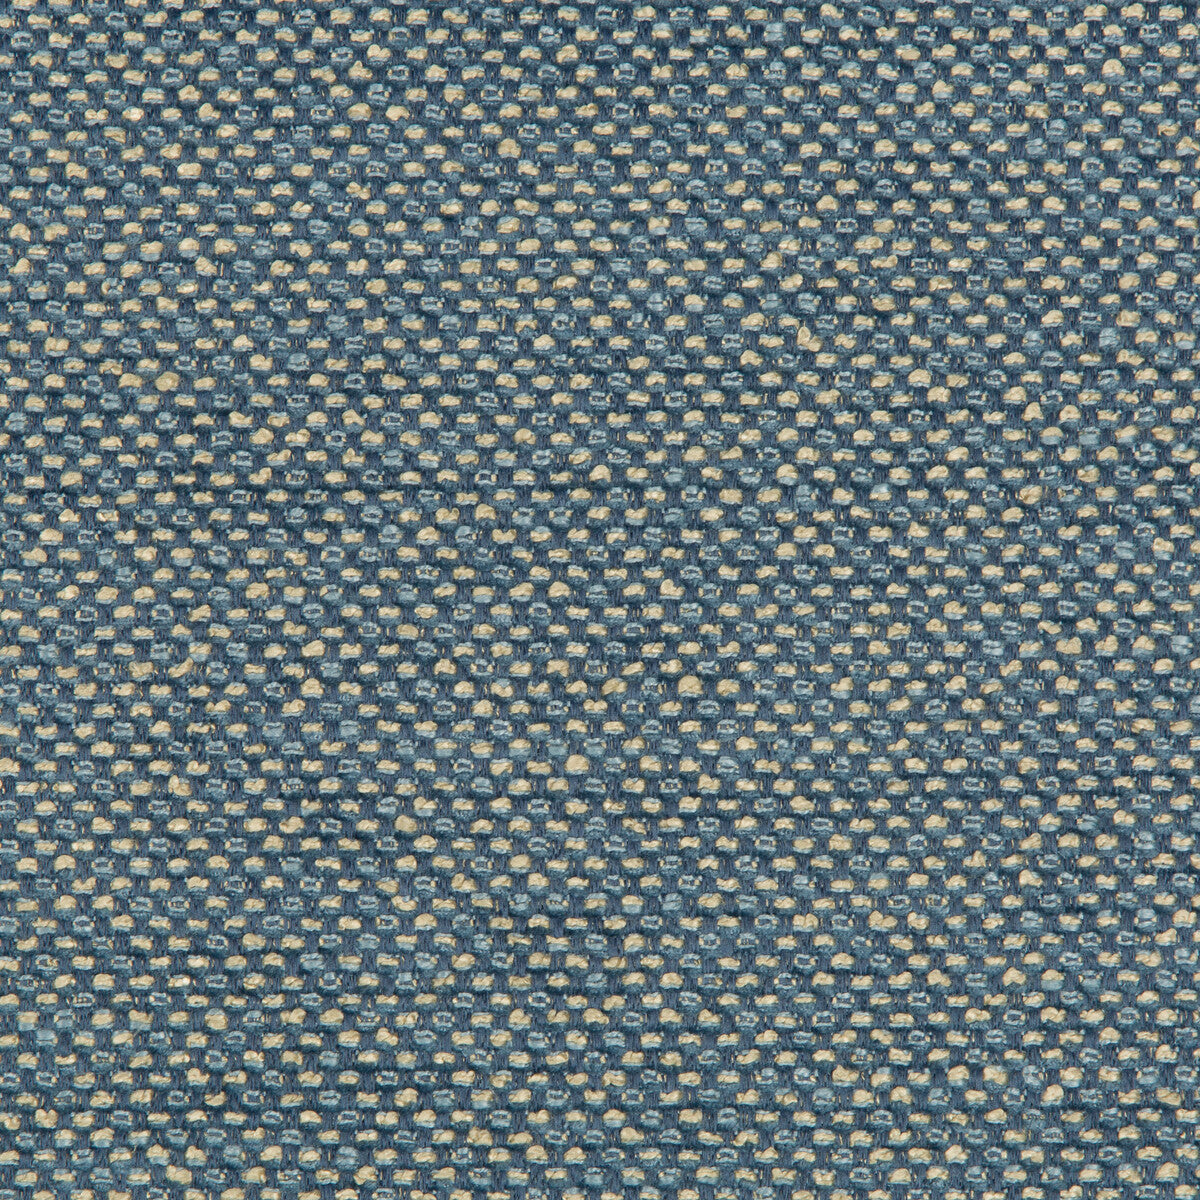 Kravet Design fabric in 34976-516 color - pattern 34976.516.0 - by Kravet Design in the Performance Crypton Home collection